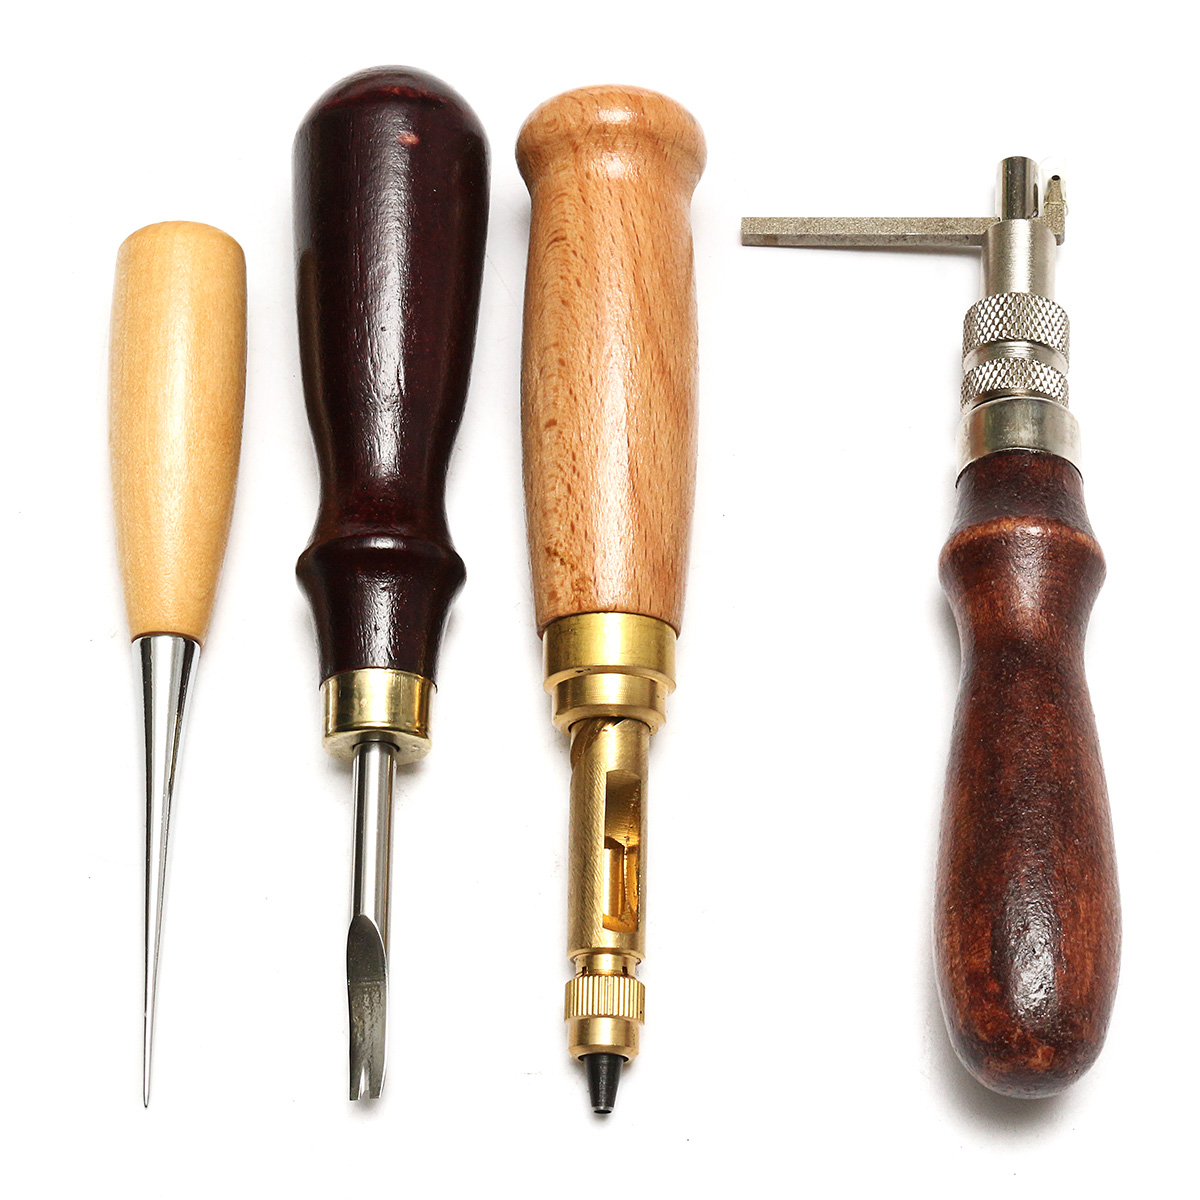 19pcs-Leather-Craft-Punch-Tools-Stitching-Carving-Working-Sewing-Saddle-Groover-Kit-1104765